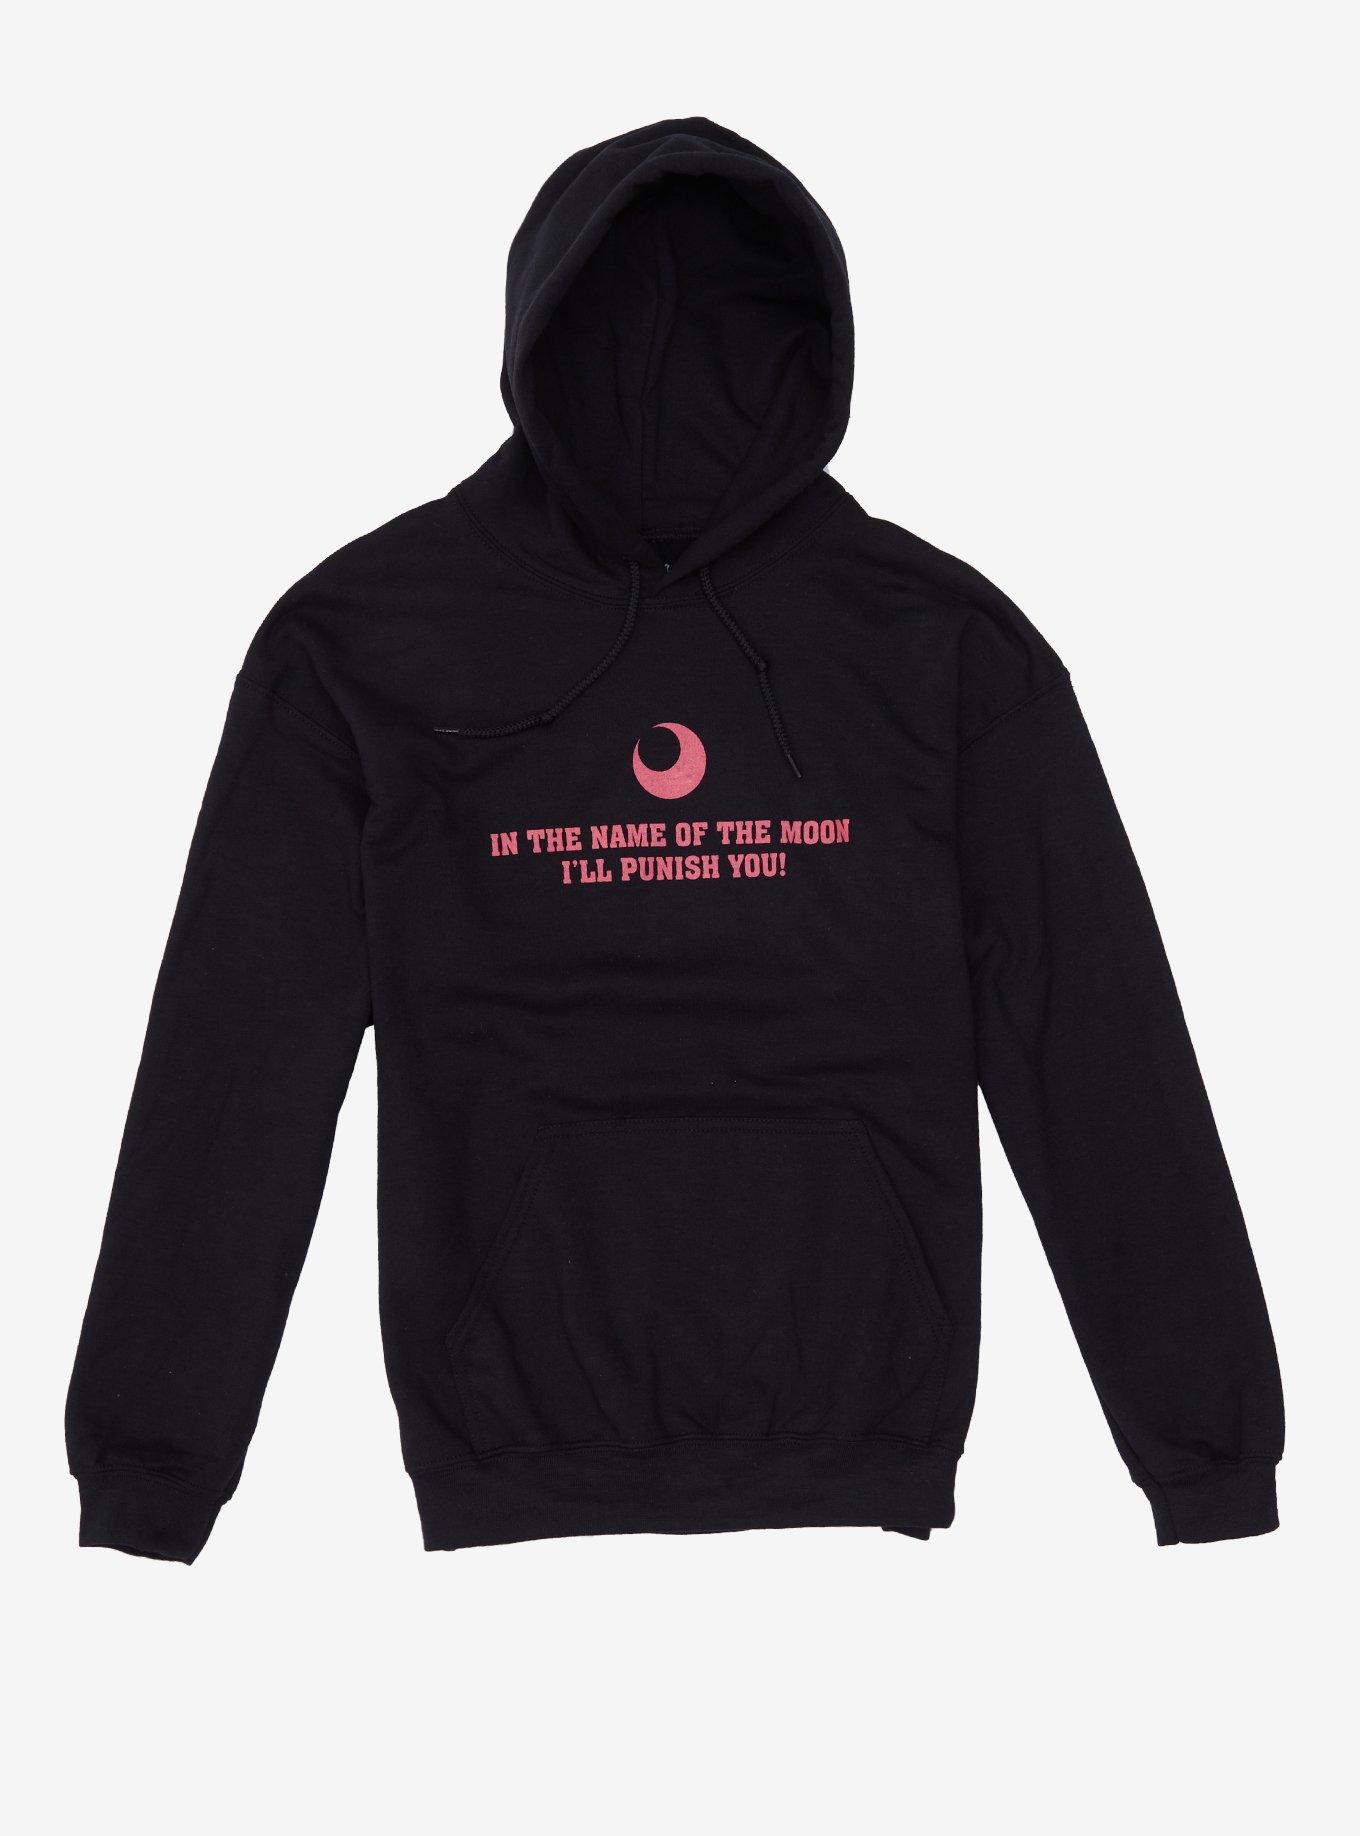 Sailor Moon In The Name Of The Moon Hoodie, MULTI, hi-res